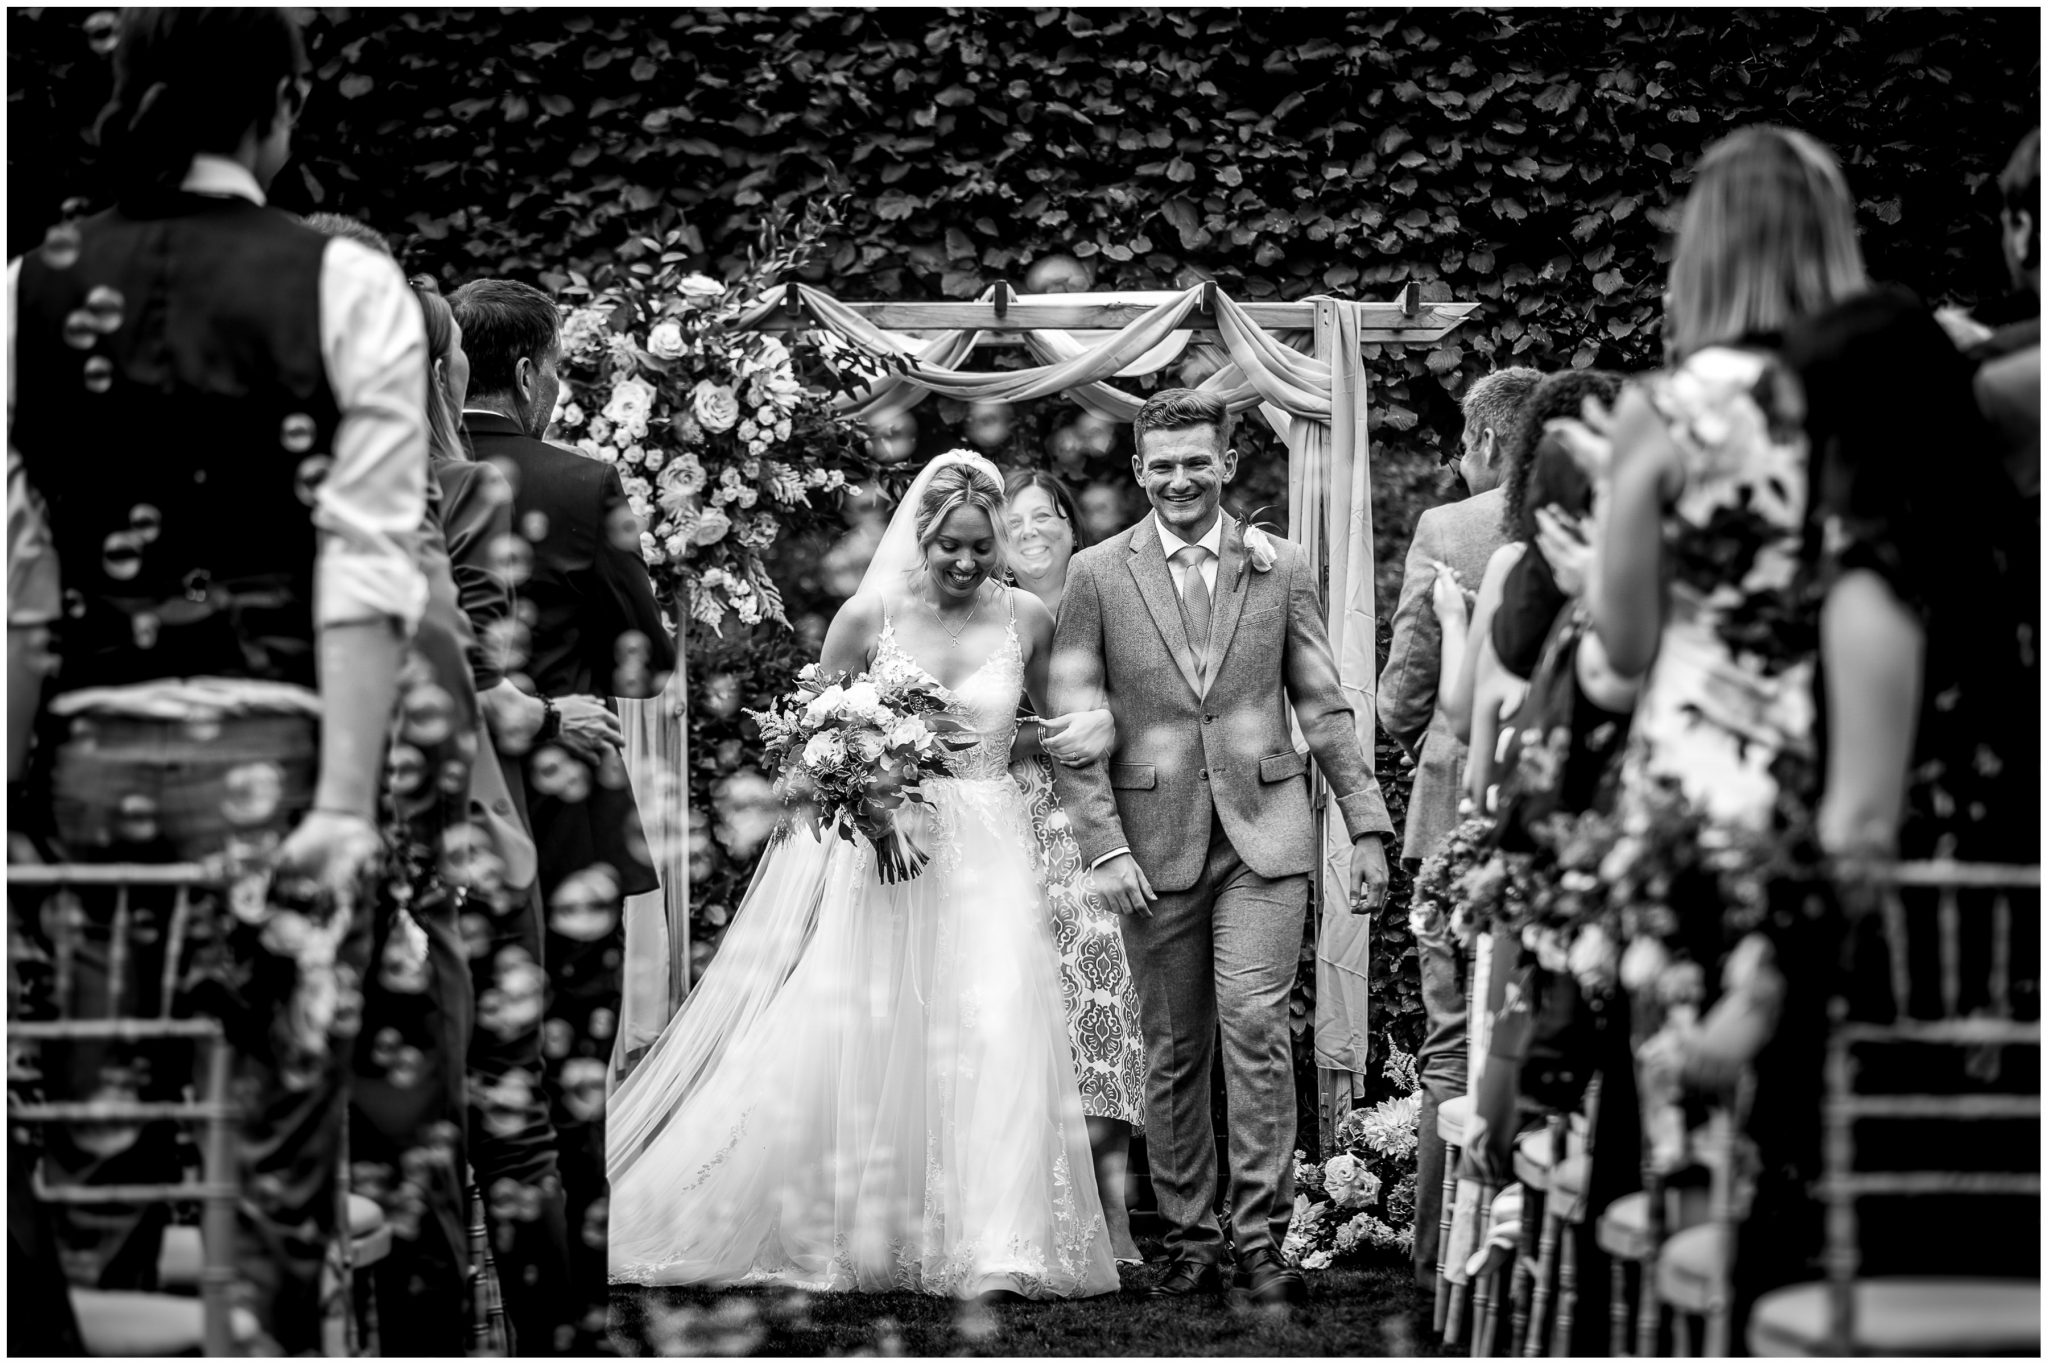 Bride and groom walk back down the aisle as husband and wife